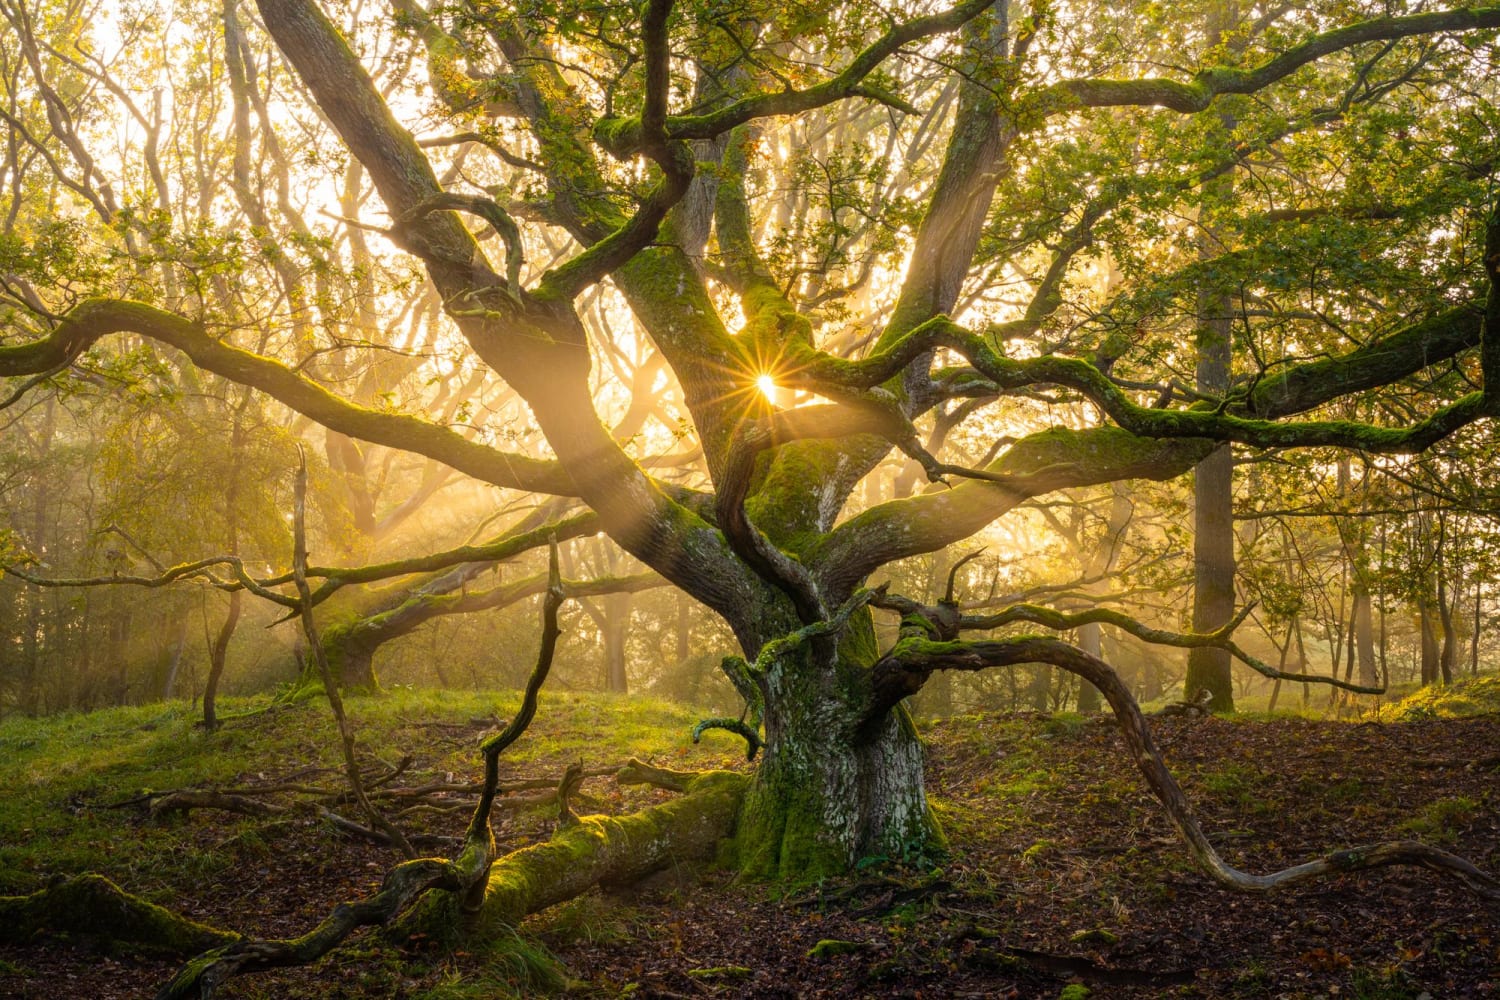 The sun peaking through the tentacles of this interesting tree, The Netherlands